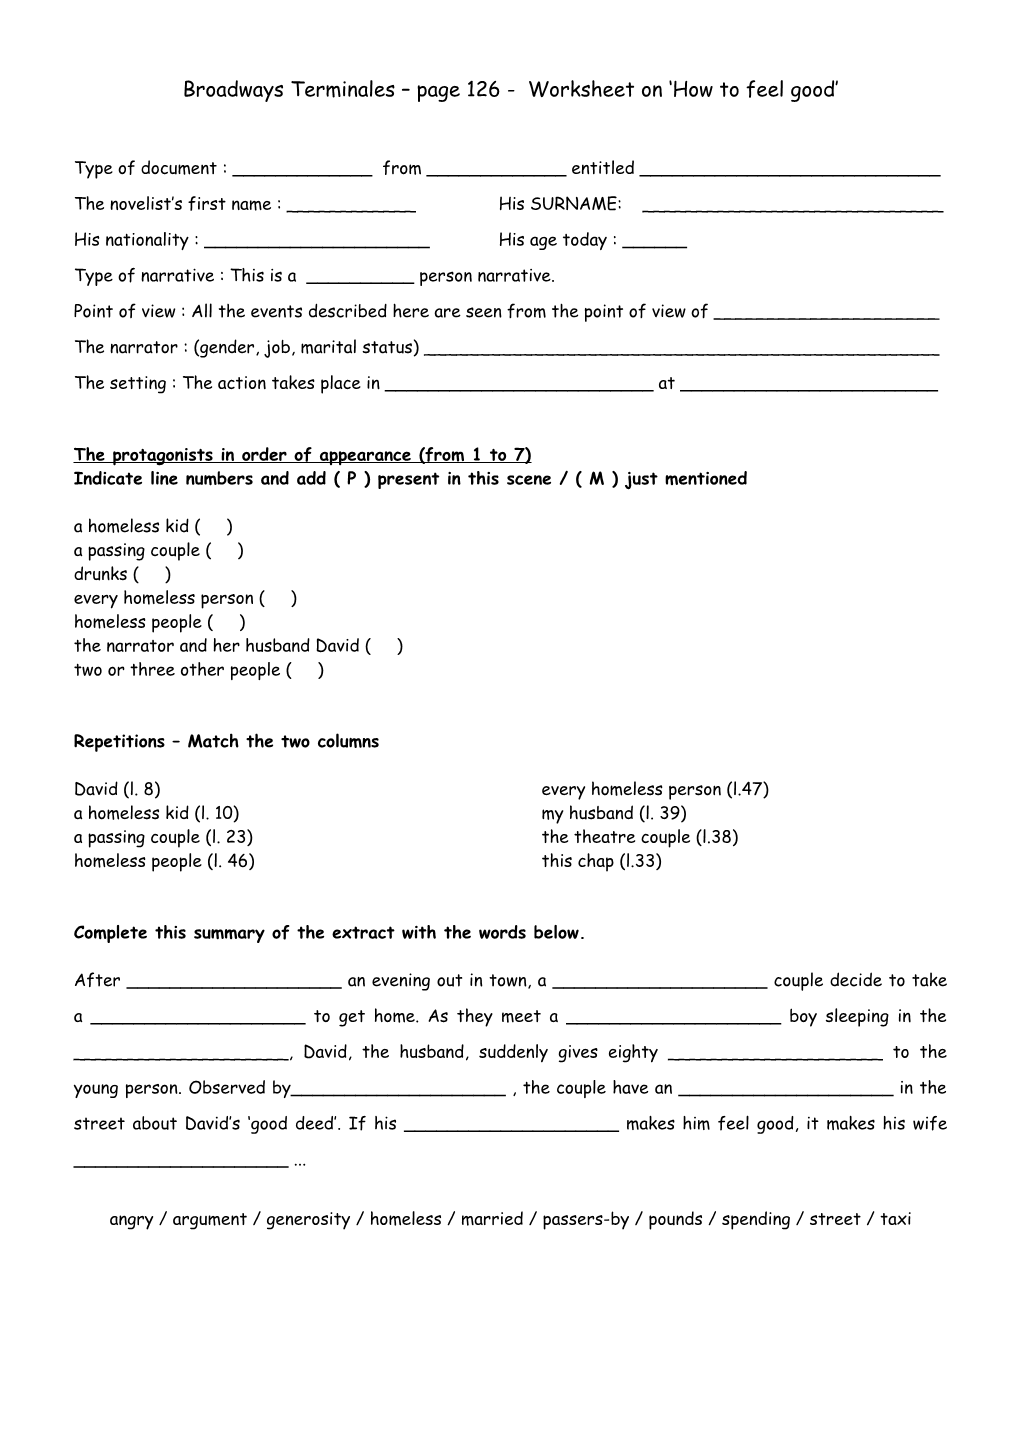 Broadways Terminales Page 126 - Worksheet on How to Feel Good